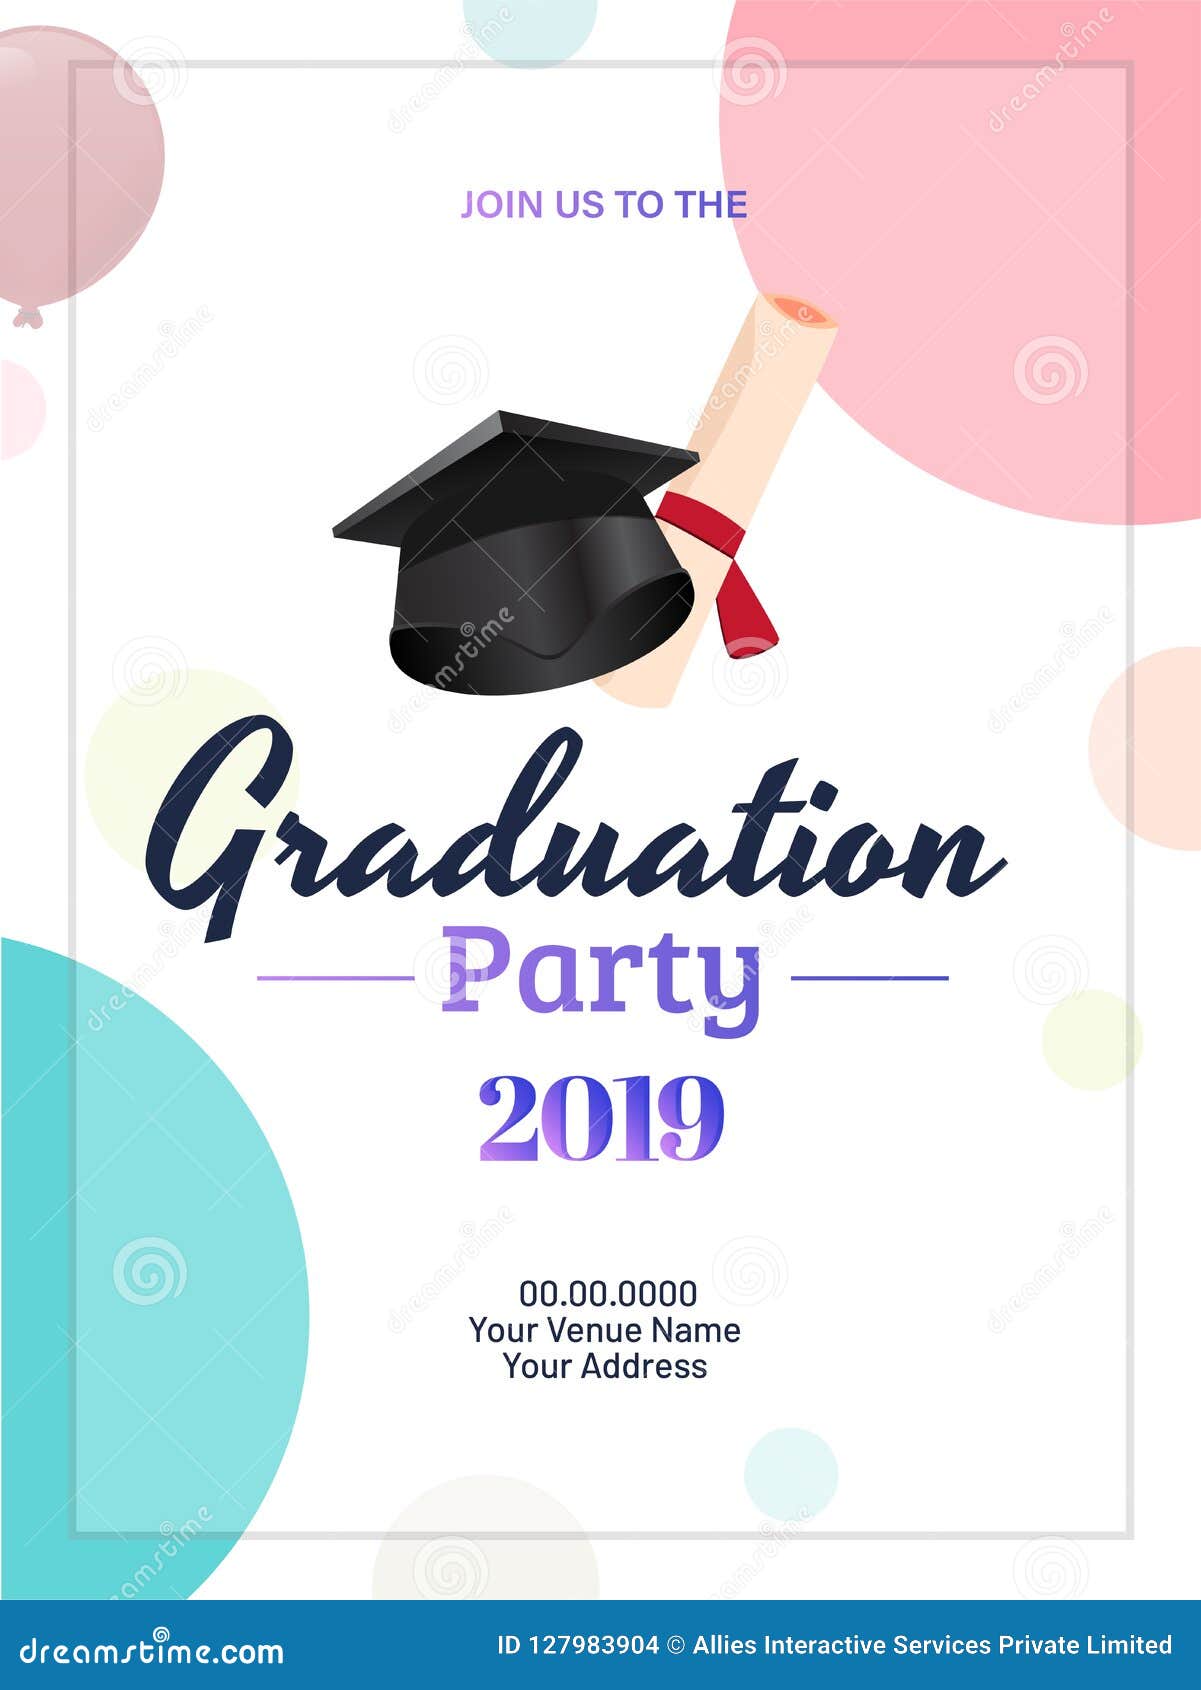 Graduation Party 23 Invitation Card or Template Design with Il Regarding Graduation Party Flyer Template